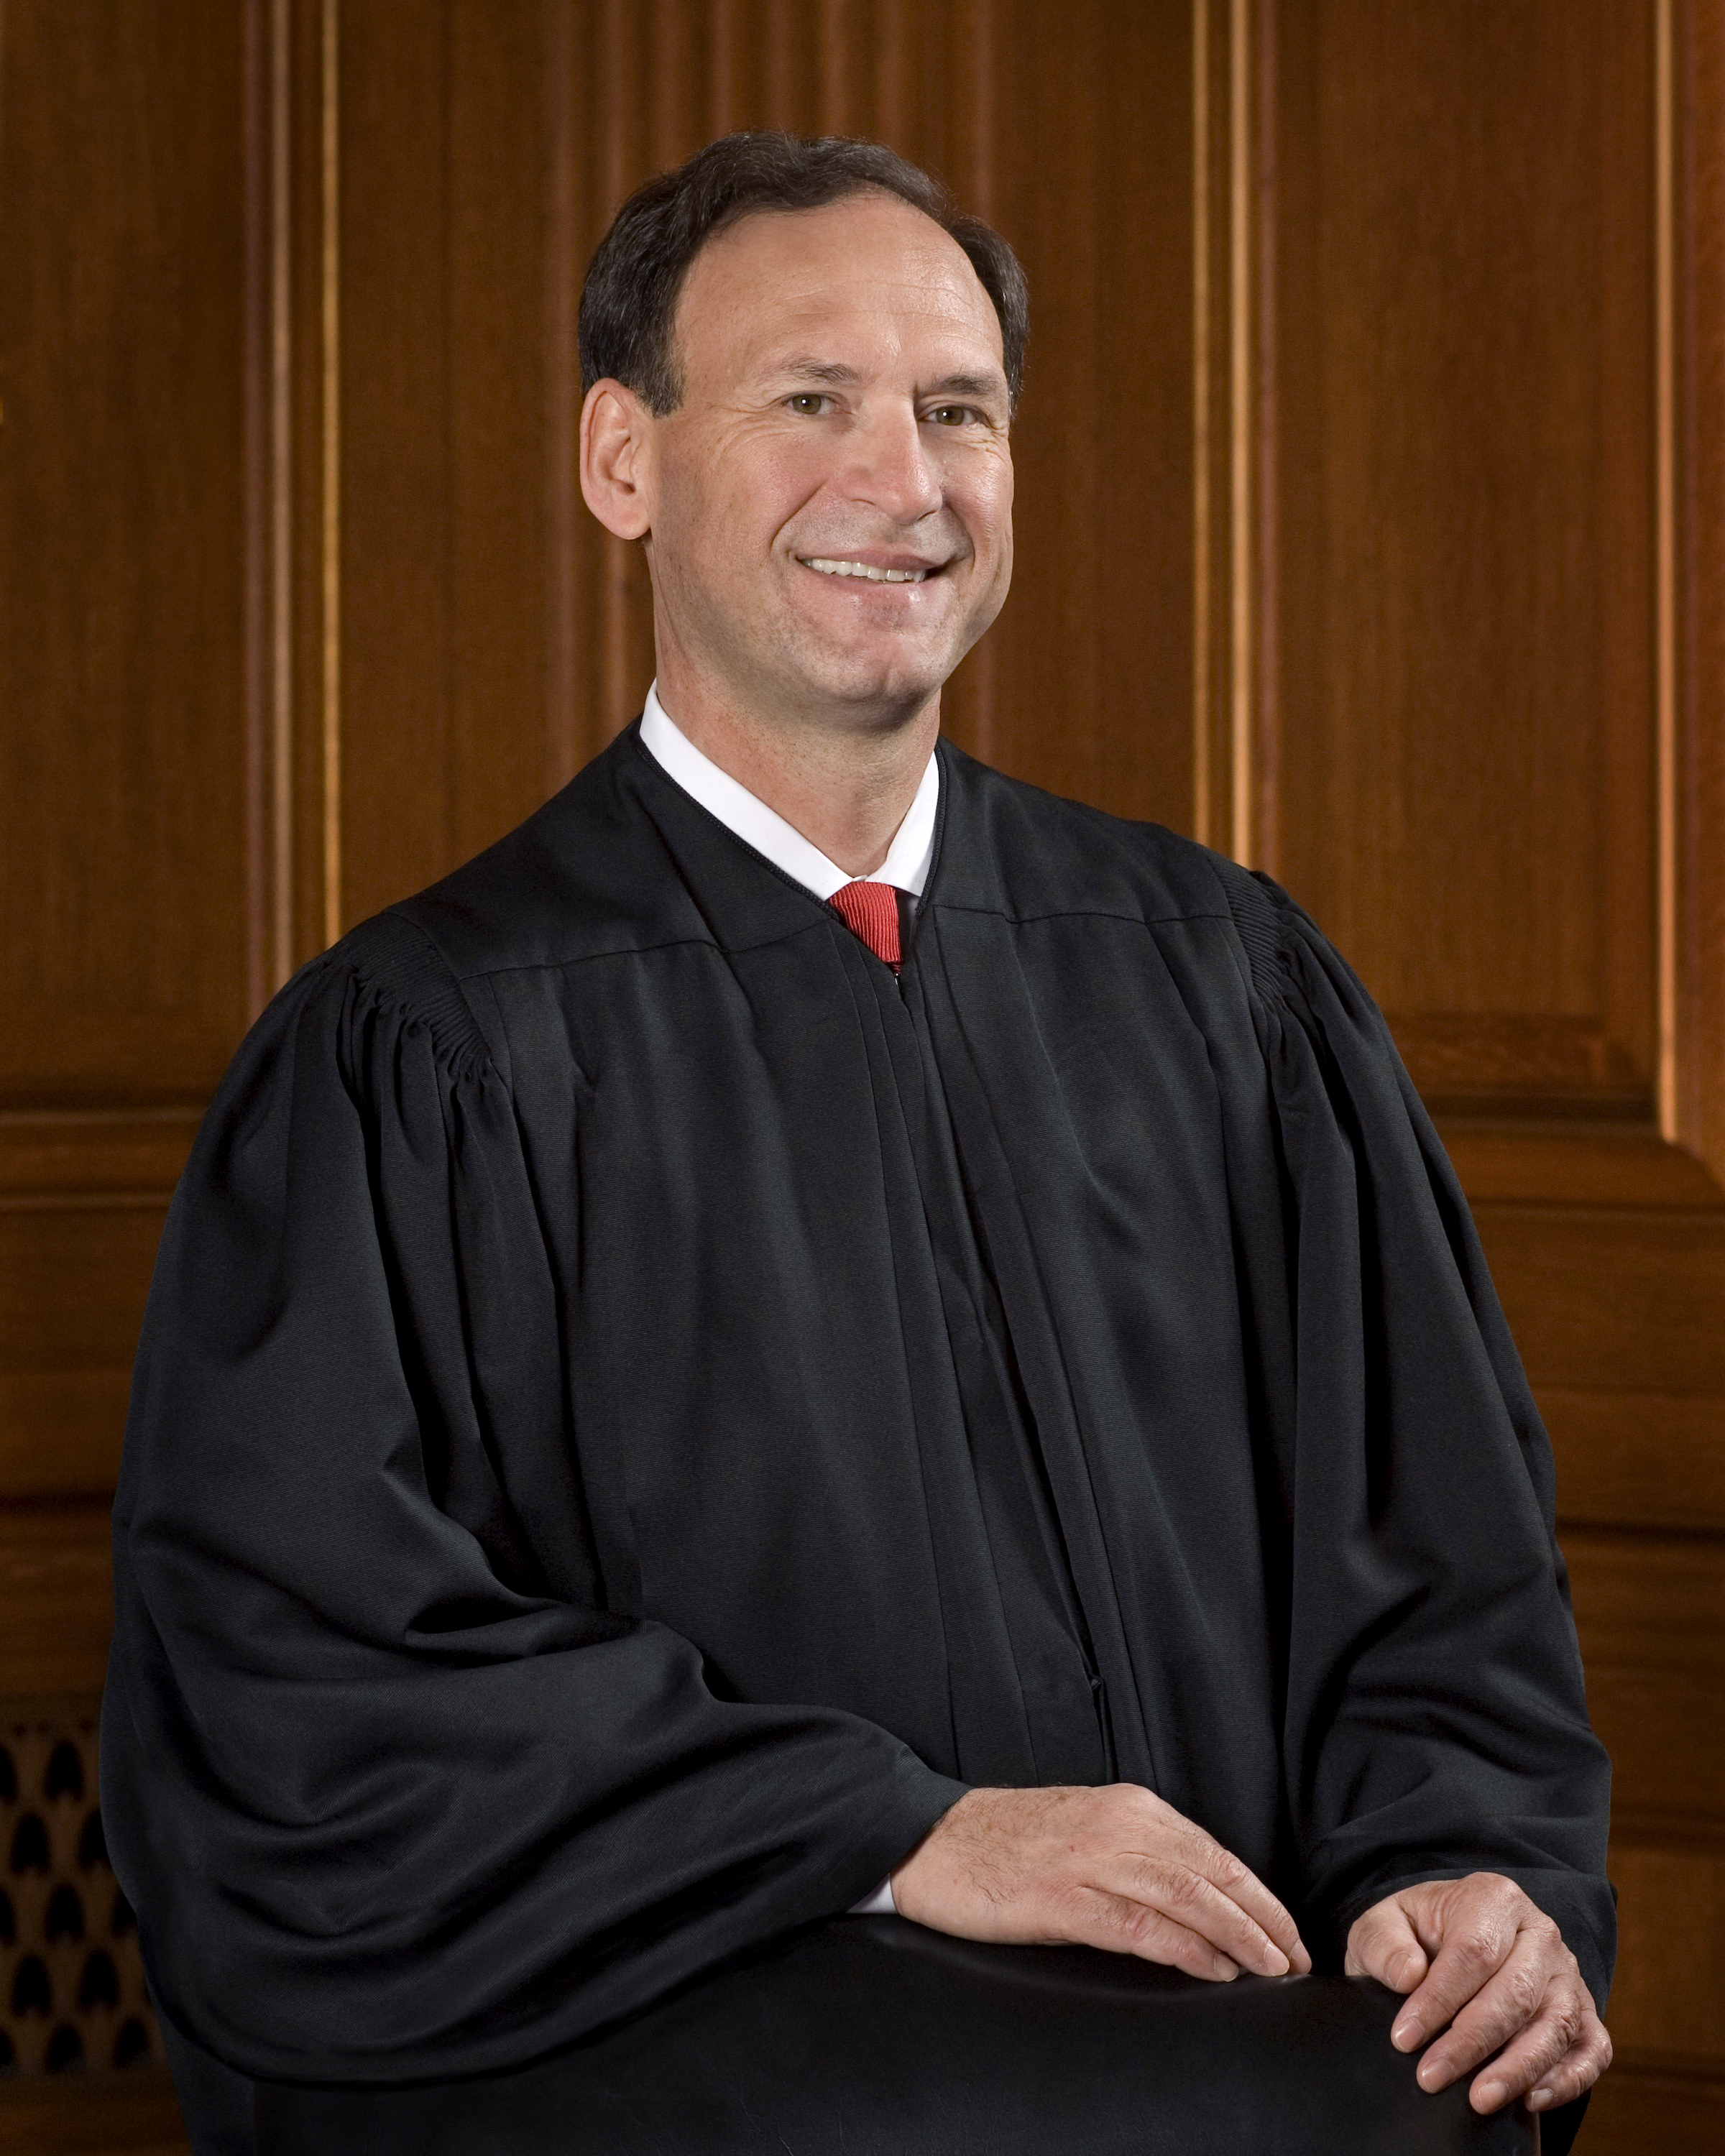  Justice Alito authored the majority opinion of the Court in Dobbs v. Jackson Women's Health Organization.